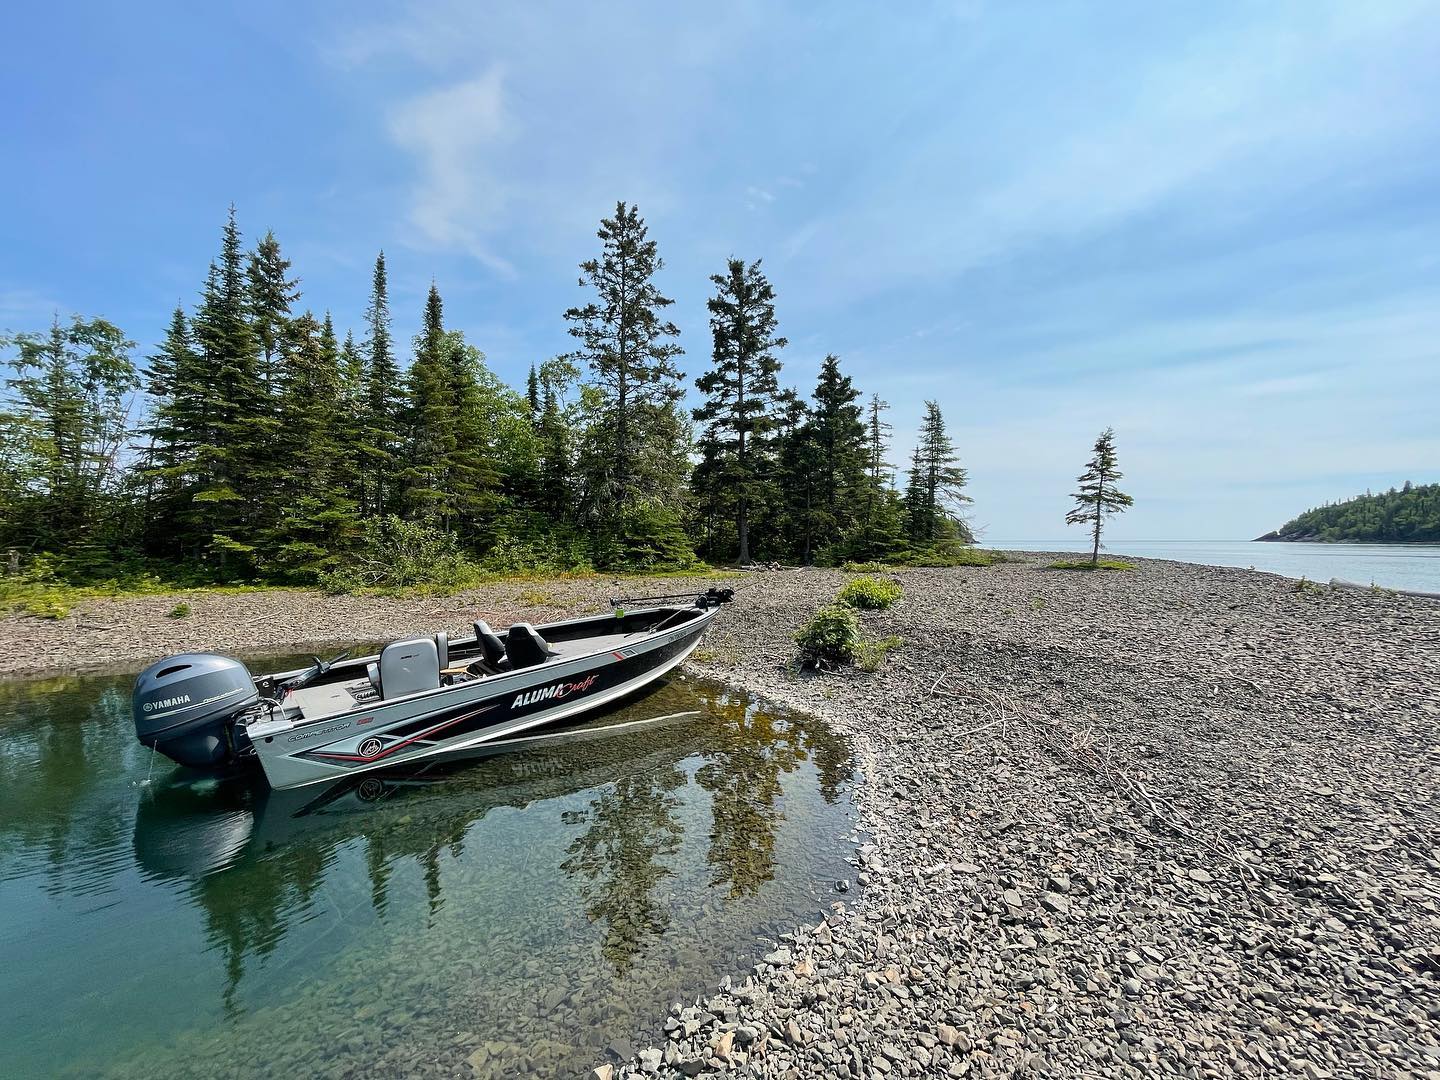 a silver motorboat beached in glassy green lake water at a pebble shorline, under a bright blue sky. Green conifer trees are in the background.